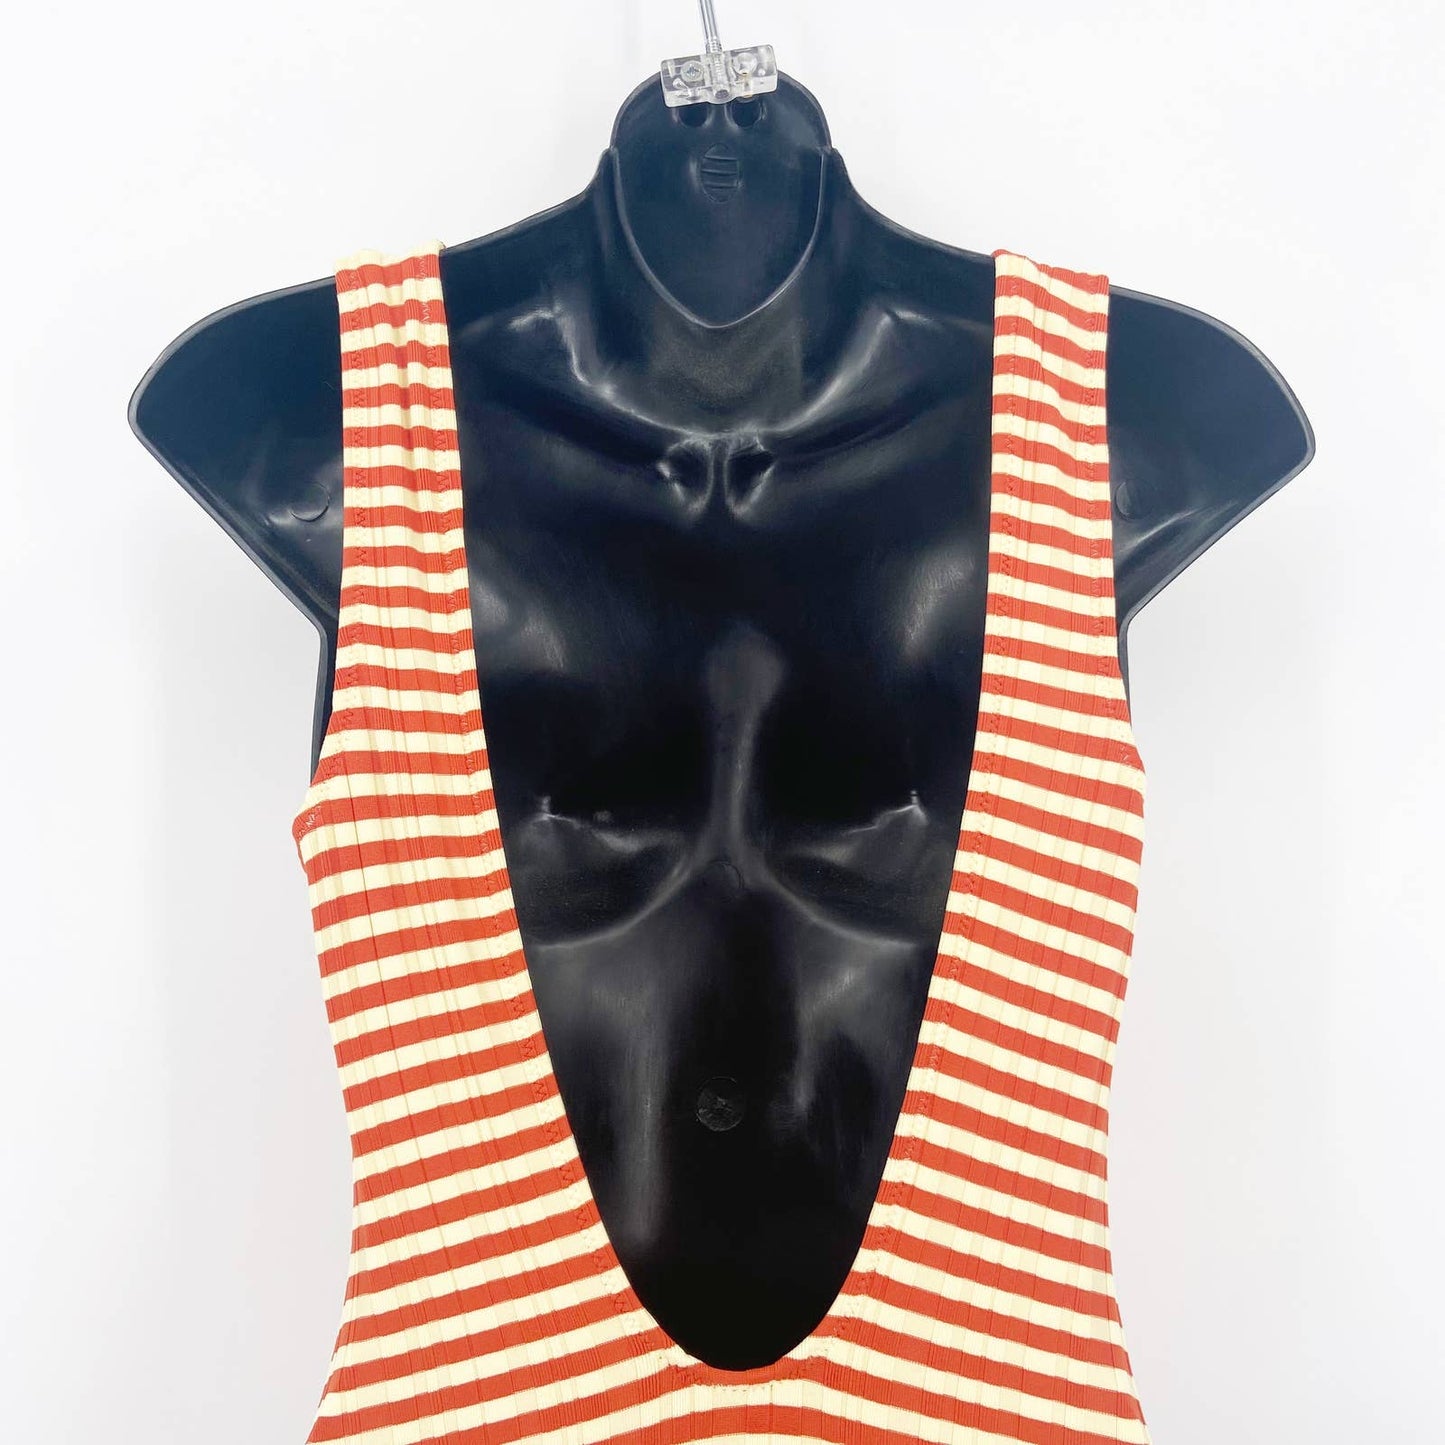 Solid & Striped One Piece Striped Low Back Swimsuit Bathing Suit Orange Small